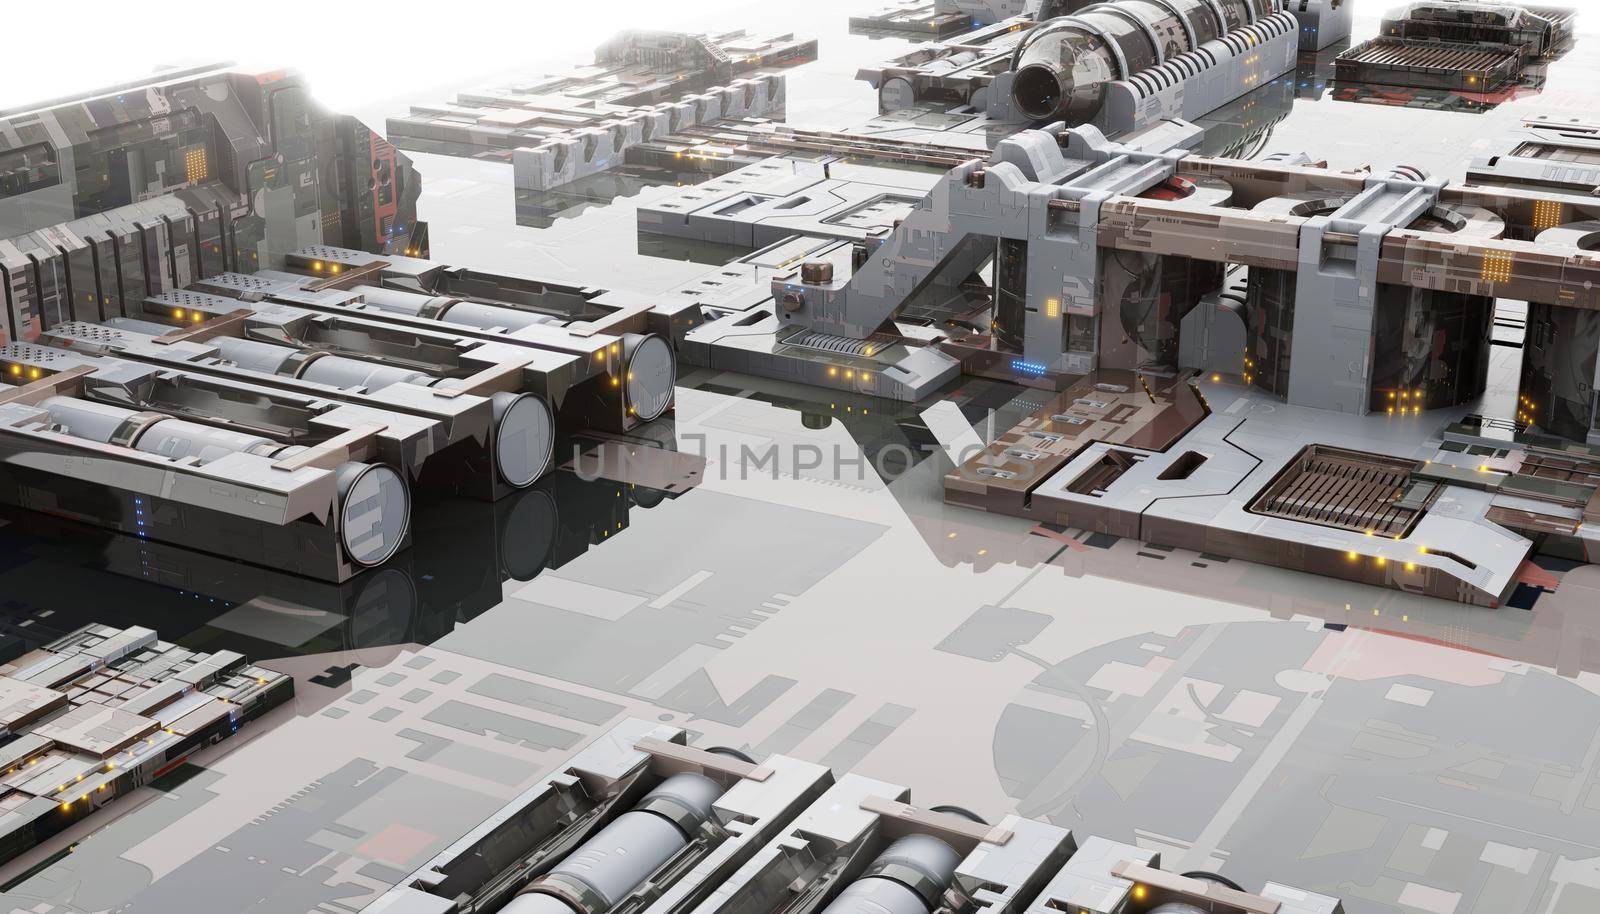 Space military base with innovative construction technology background. Sci-fi and industrial concept. 3D illustration rendering